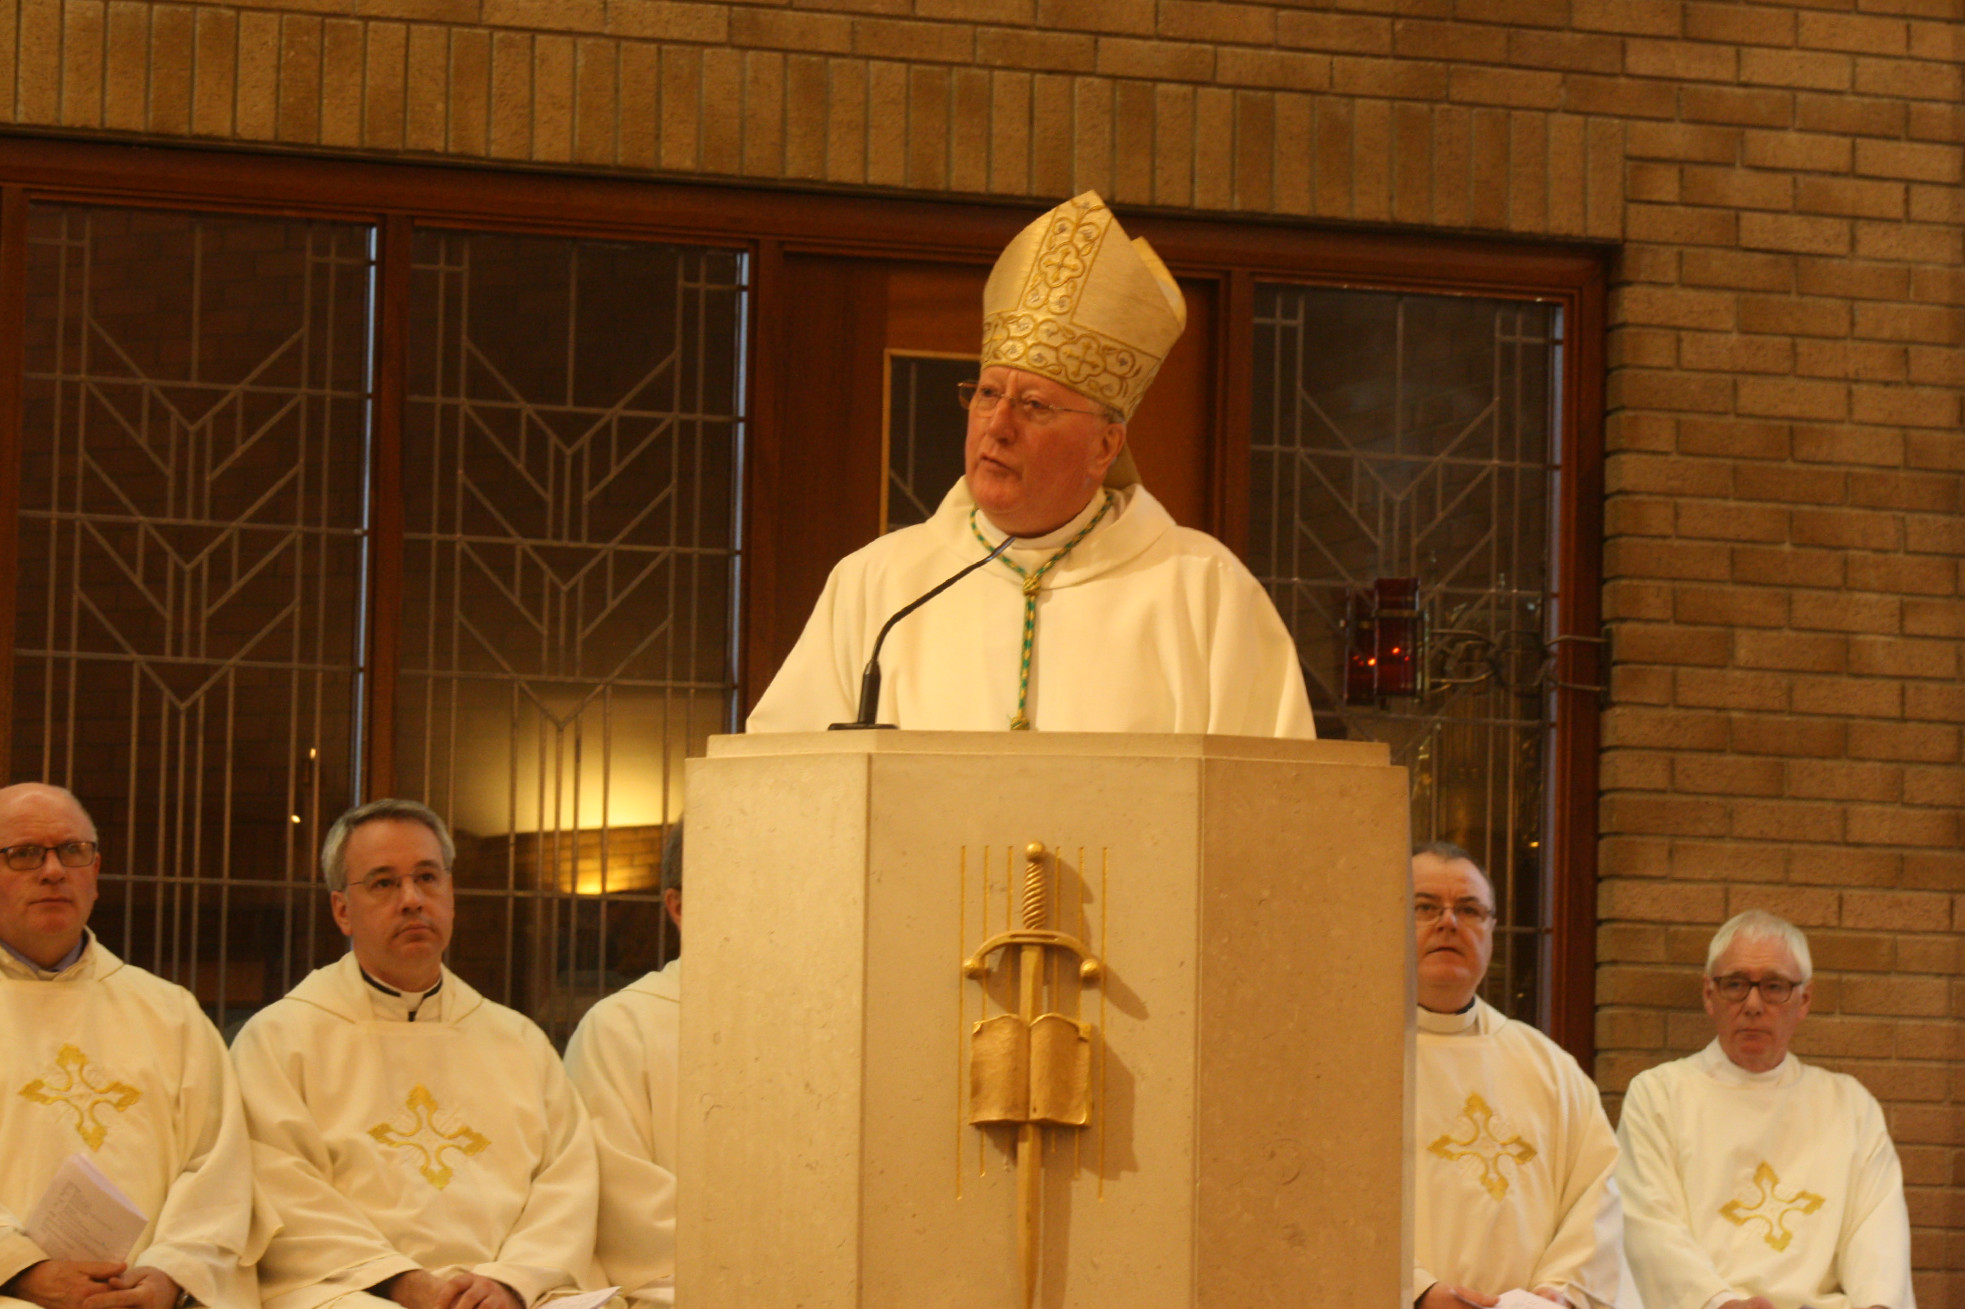 Bishop Terry at the 2018 Chrism Mass in St Mary's Cathedral